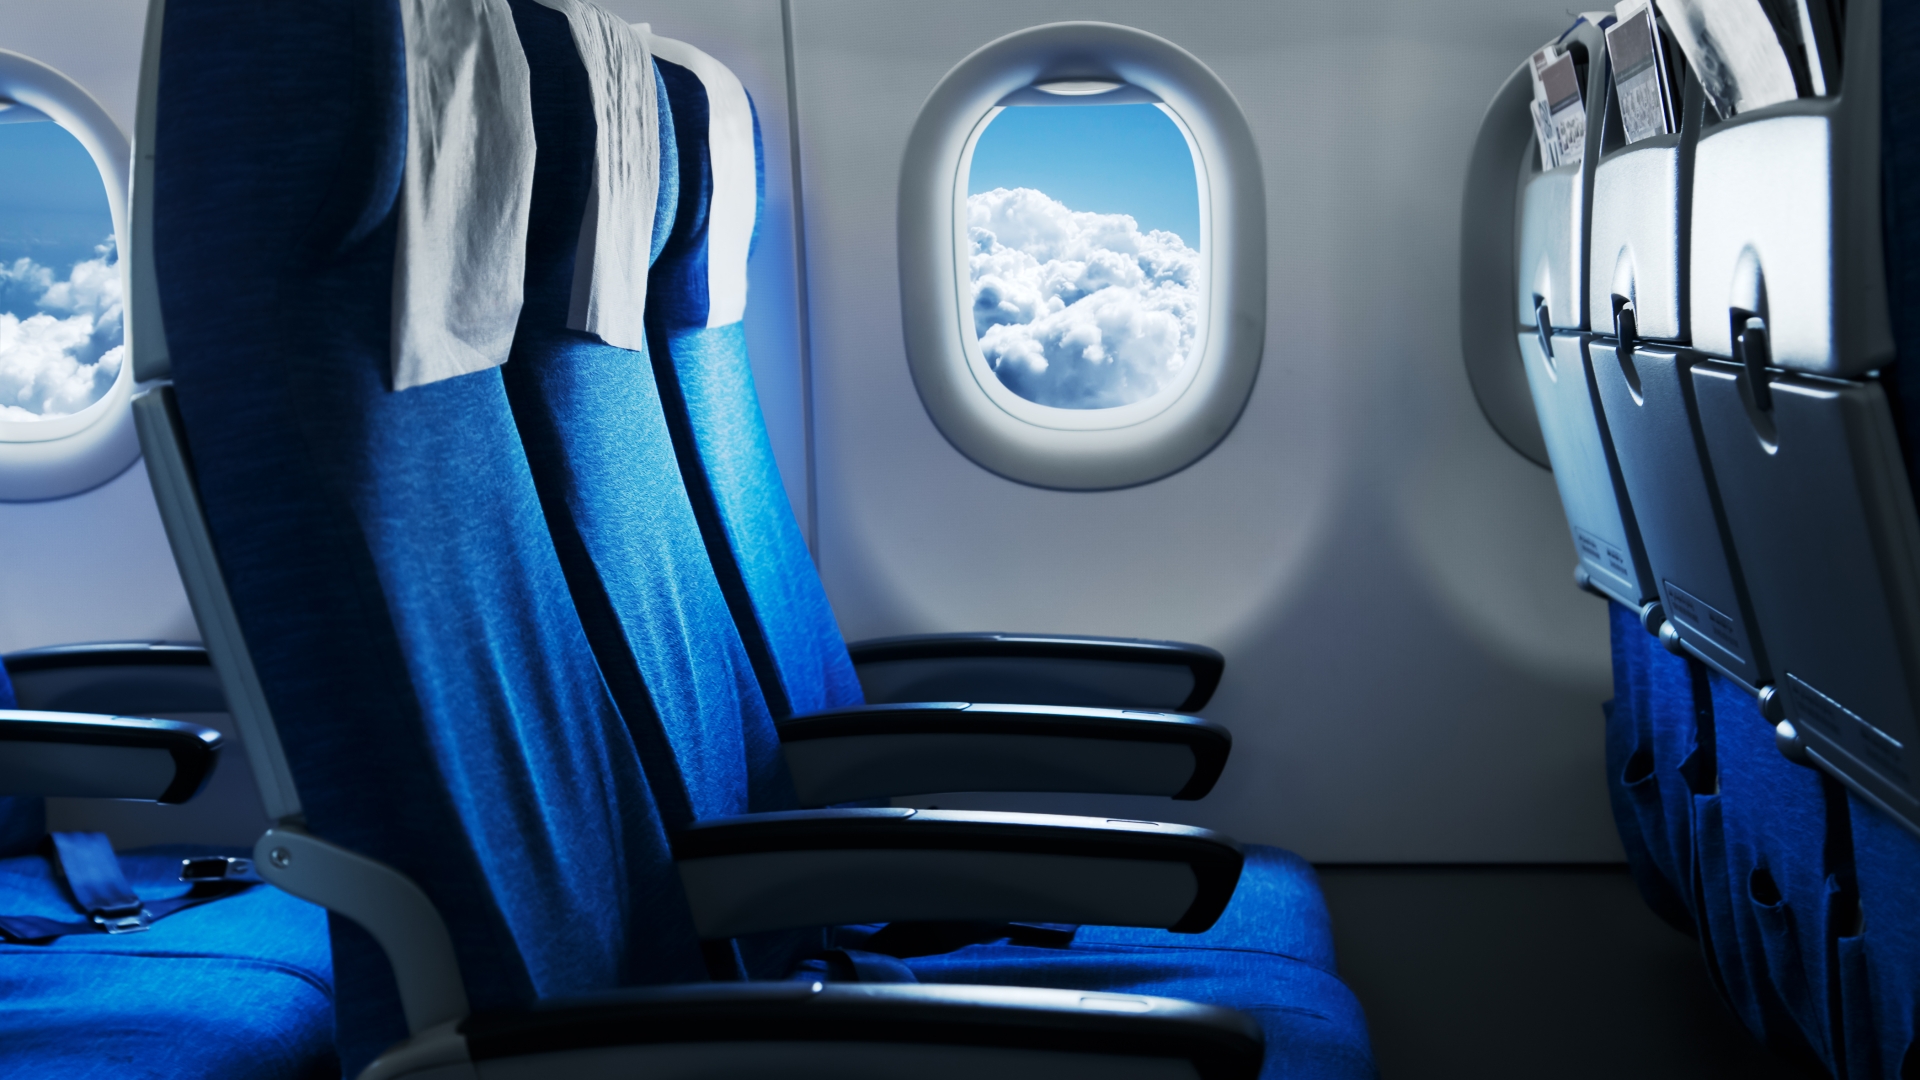 A former flight attendant reveals which seats are the best to book and which to avoid.